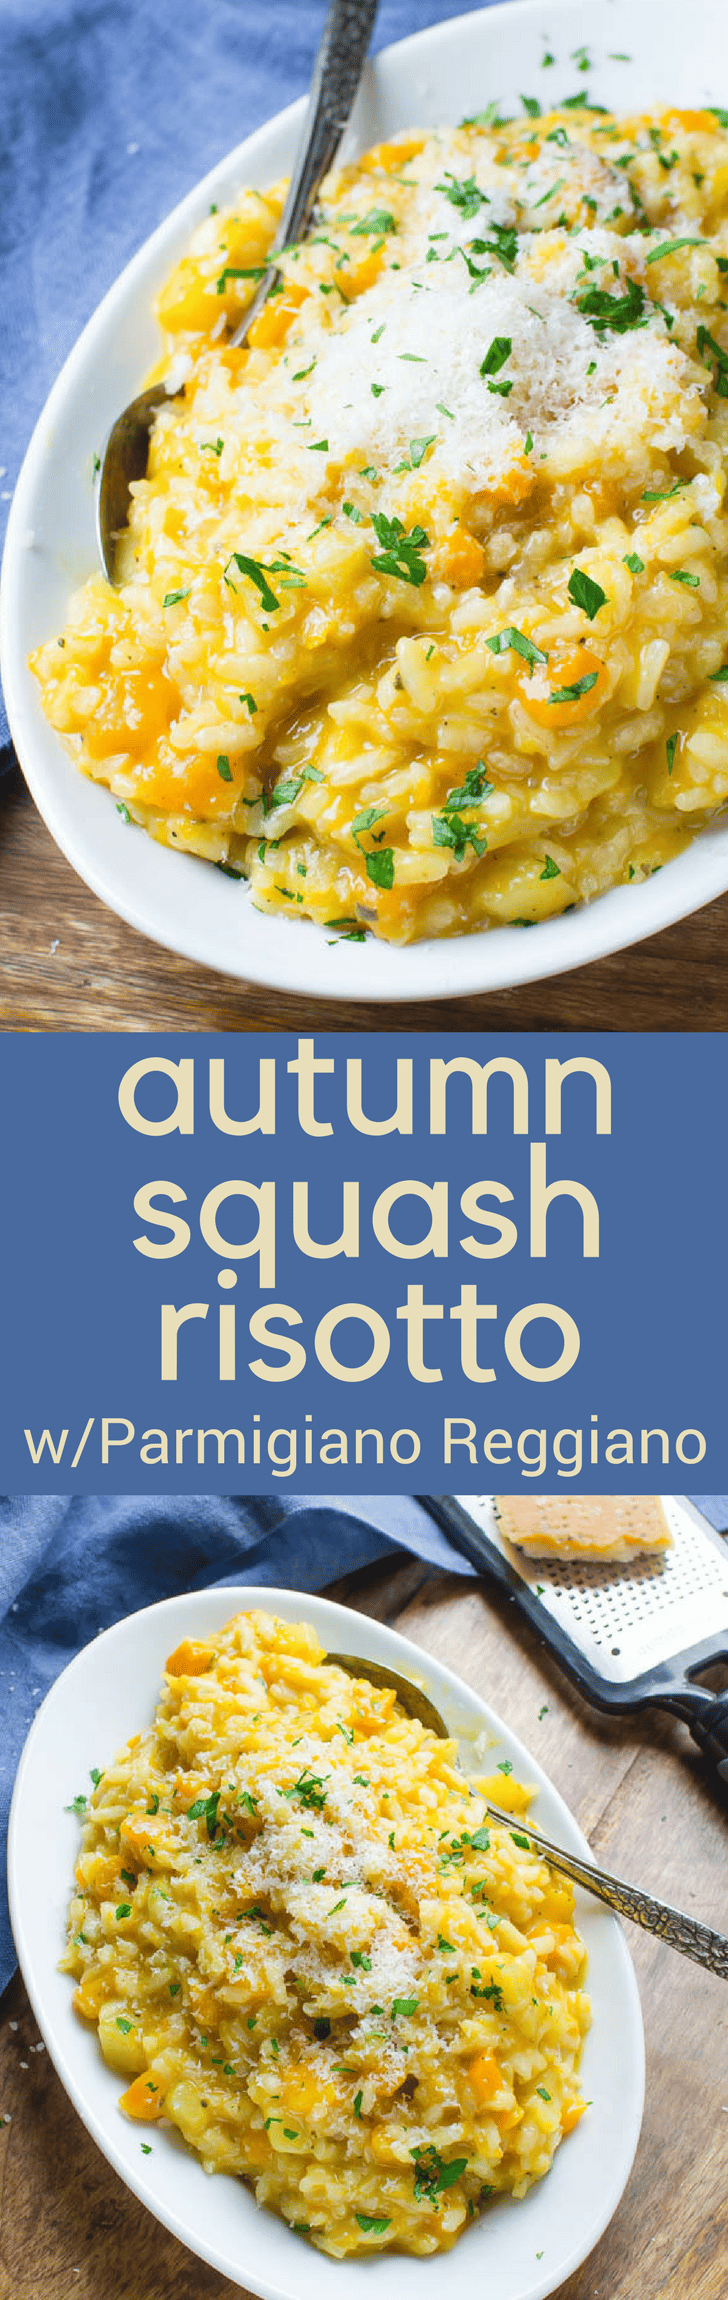 Need an easy and impressive fall side dish? Autumn Squash Risotto with Parmigiano Reggiano recipe goes great with pork and chicken. #ad #theonlyparmesan